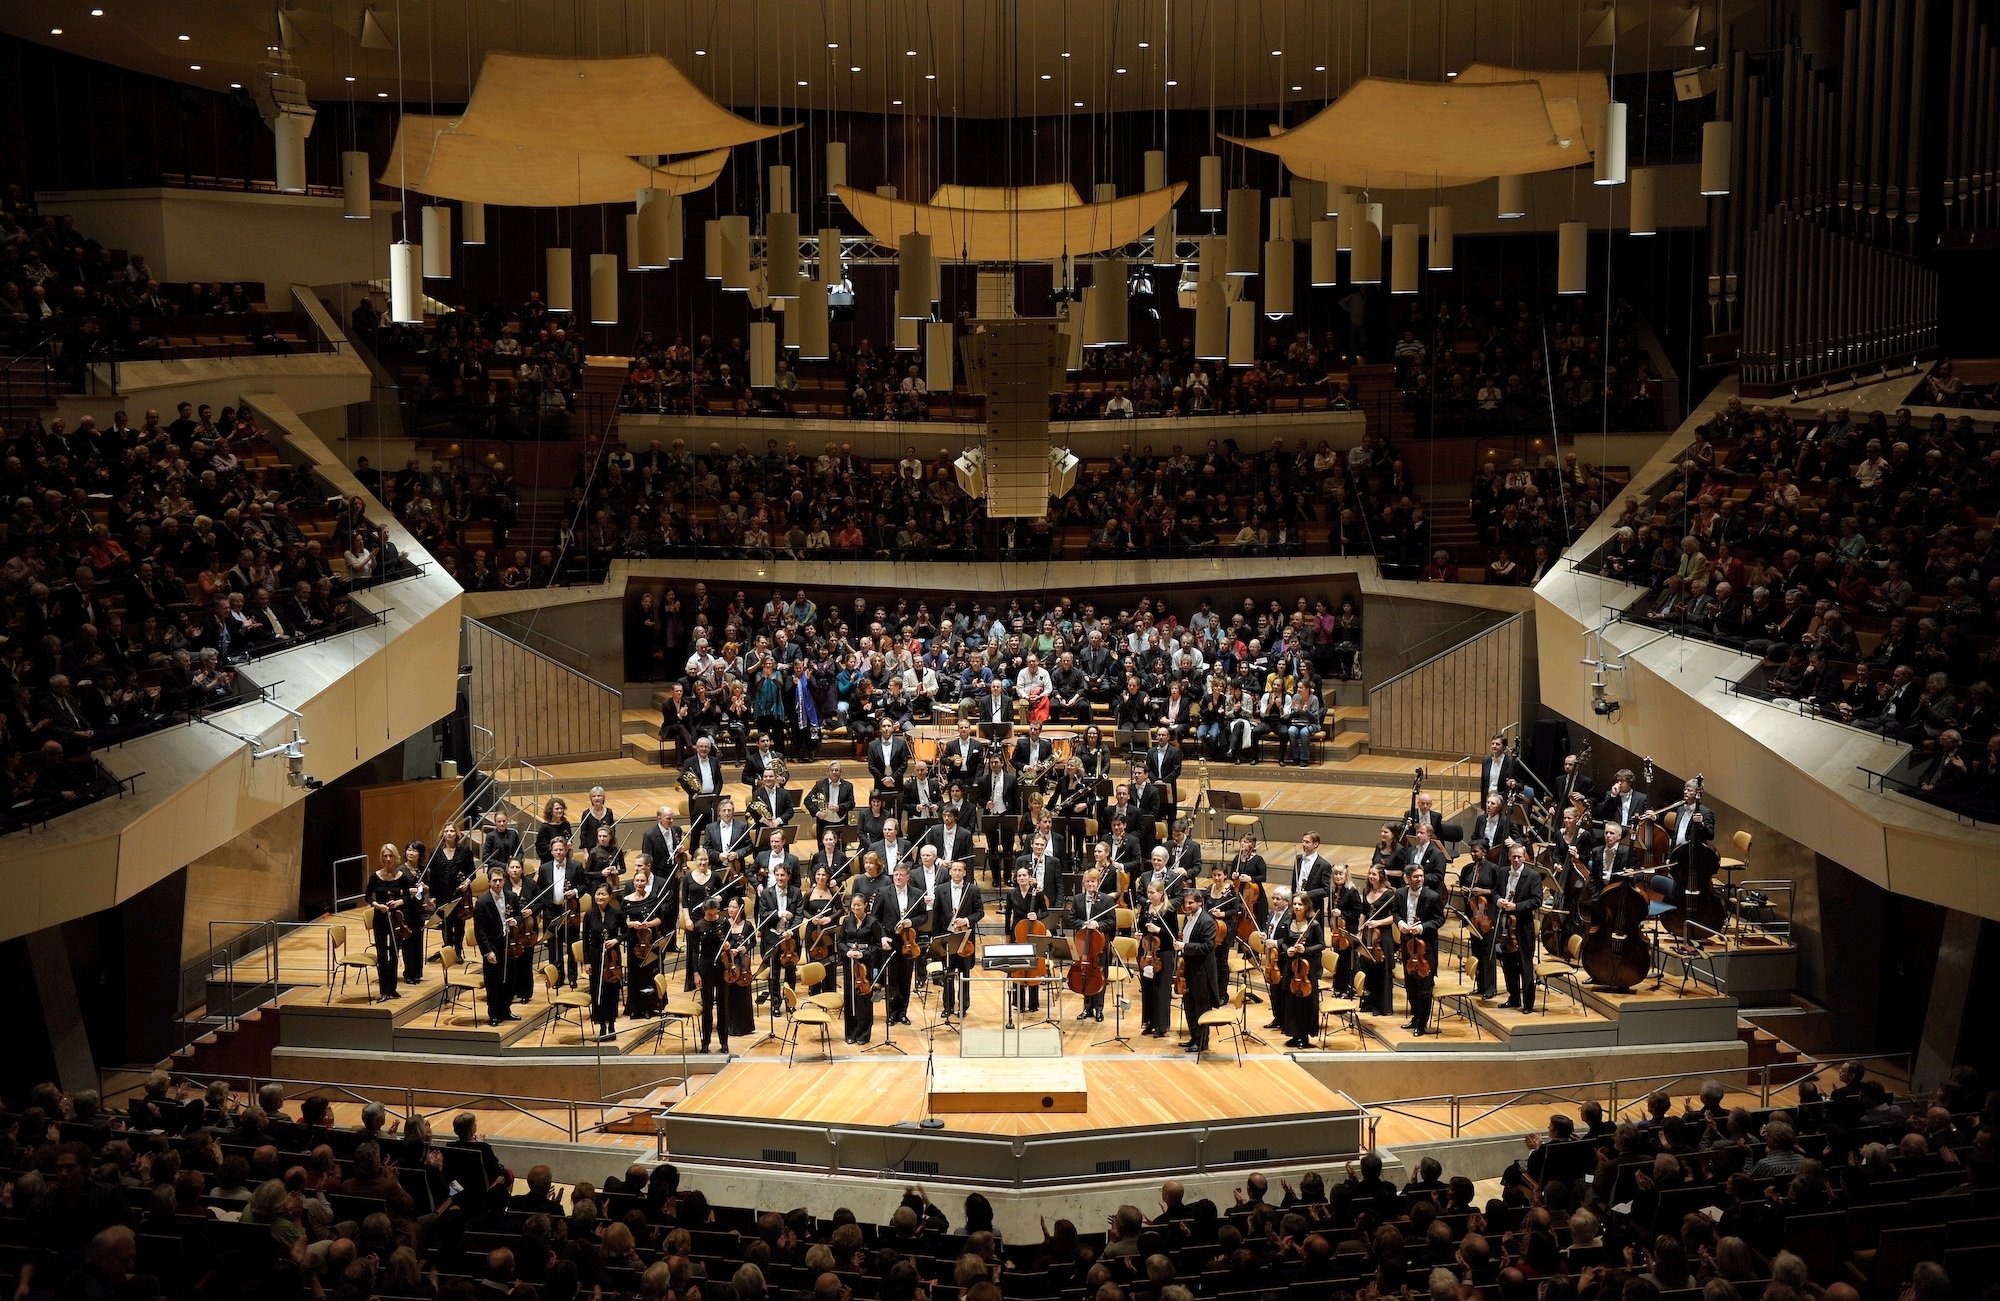 Deutsches Symphonie-Orchester Berlin will perform under the baton of Giovanni Antonini as part of the Başkent Culture Road Festival. 